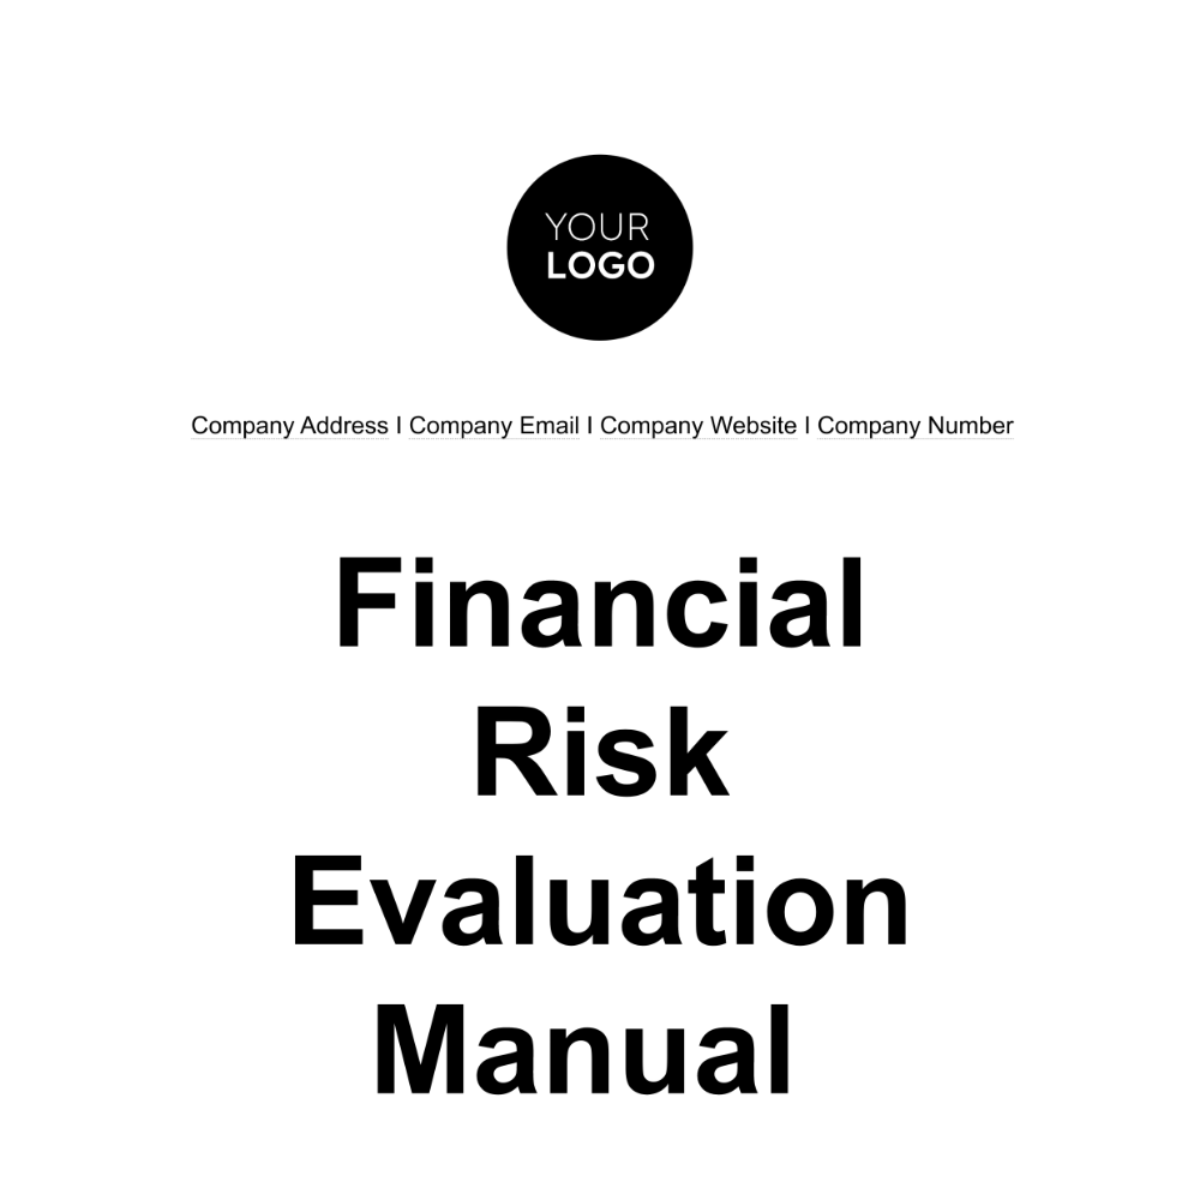 Financial Risk Evaluation Manual Template